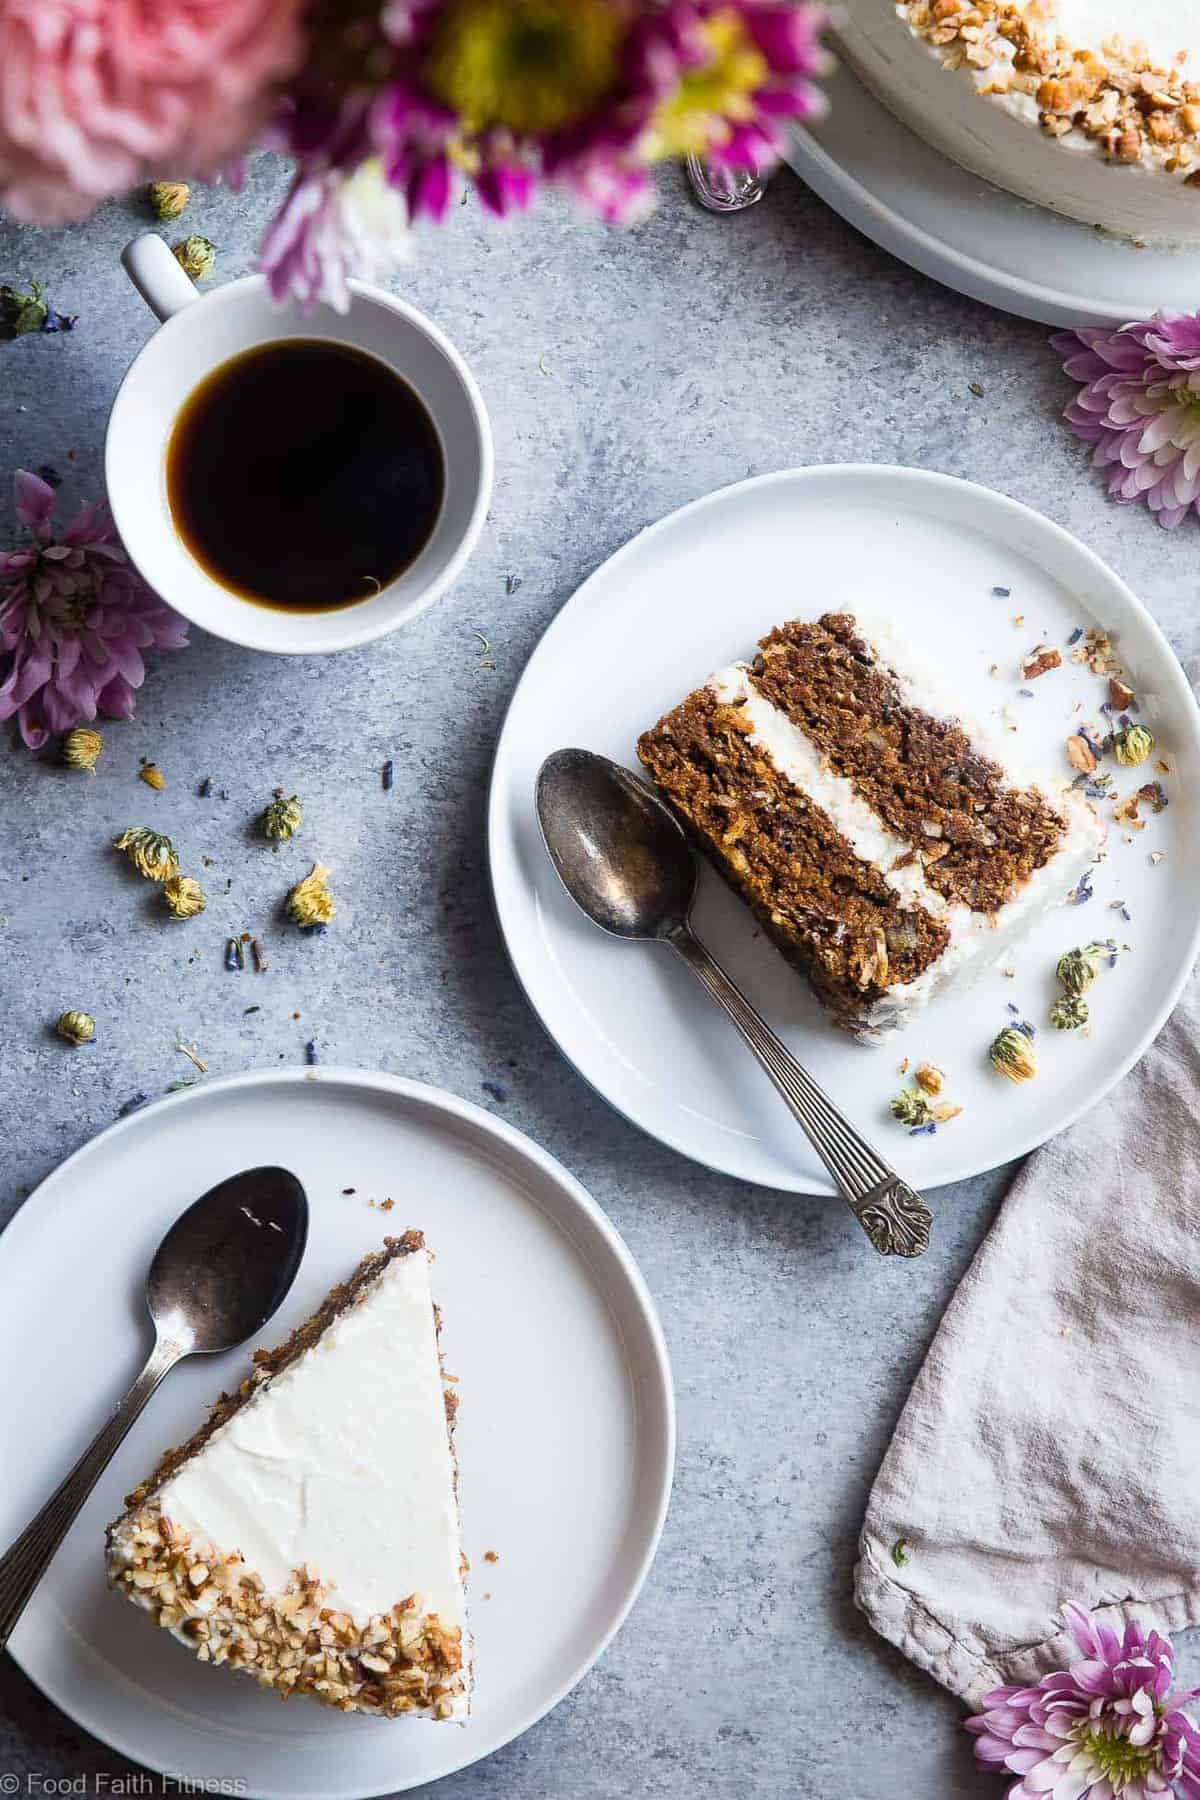 Vegan Gluten Free Dairy Free Carrot Cake - This one bowl, healthy carrot cake is SO moist and tender, you'll never know it's plant based, made without eggs and is gluten/grain/dairy/refined sugar free! Perfect for Easter! | #Foodfaitfitness | #Vegan #Easter #Glutenfree #DairyFree #Carrotcake